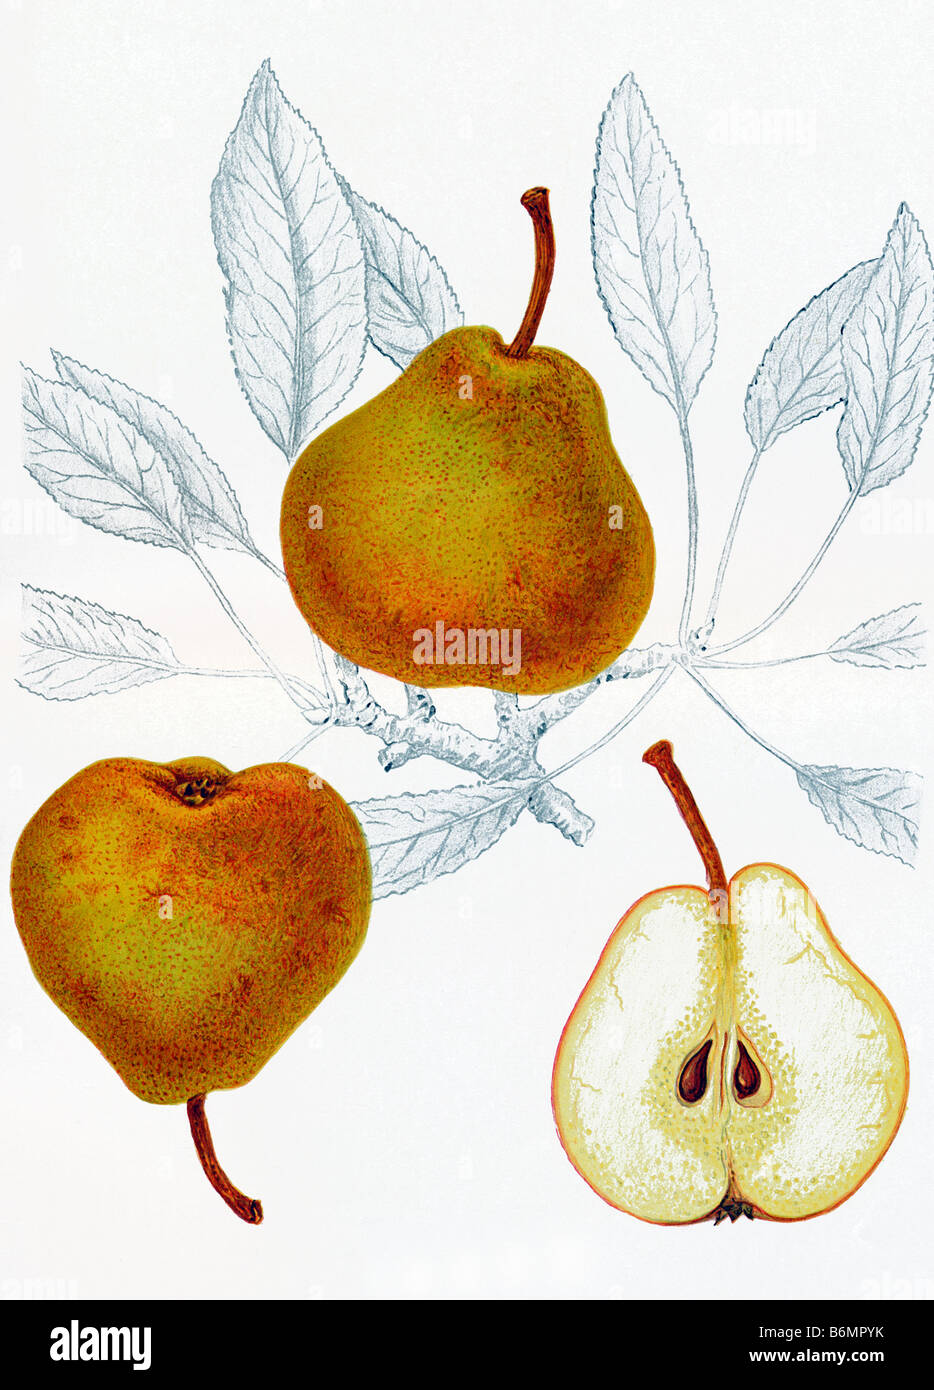 illustration of a pear and a pear half Stock Photo